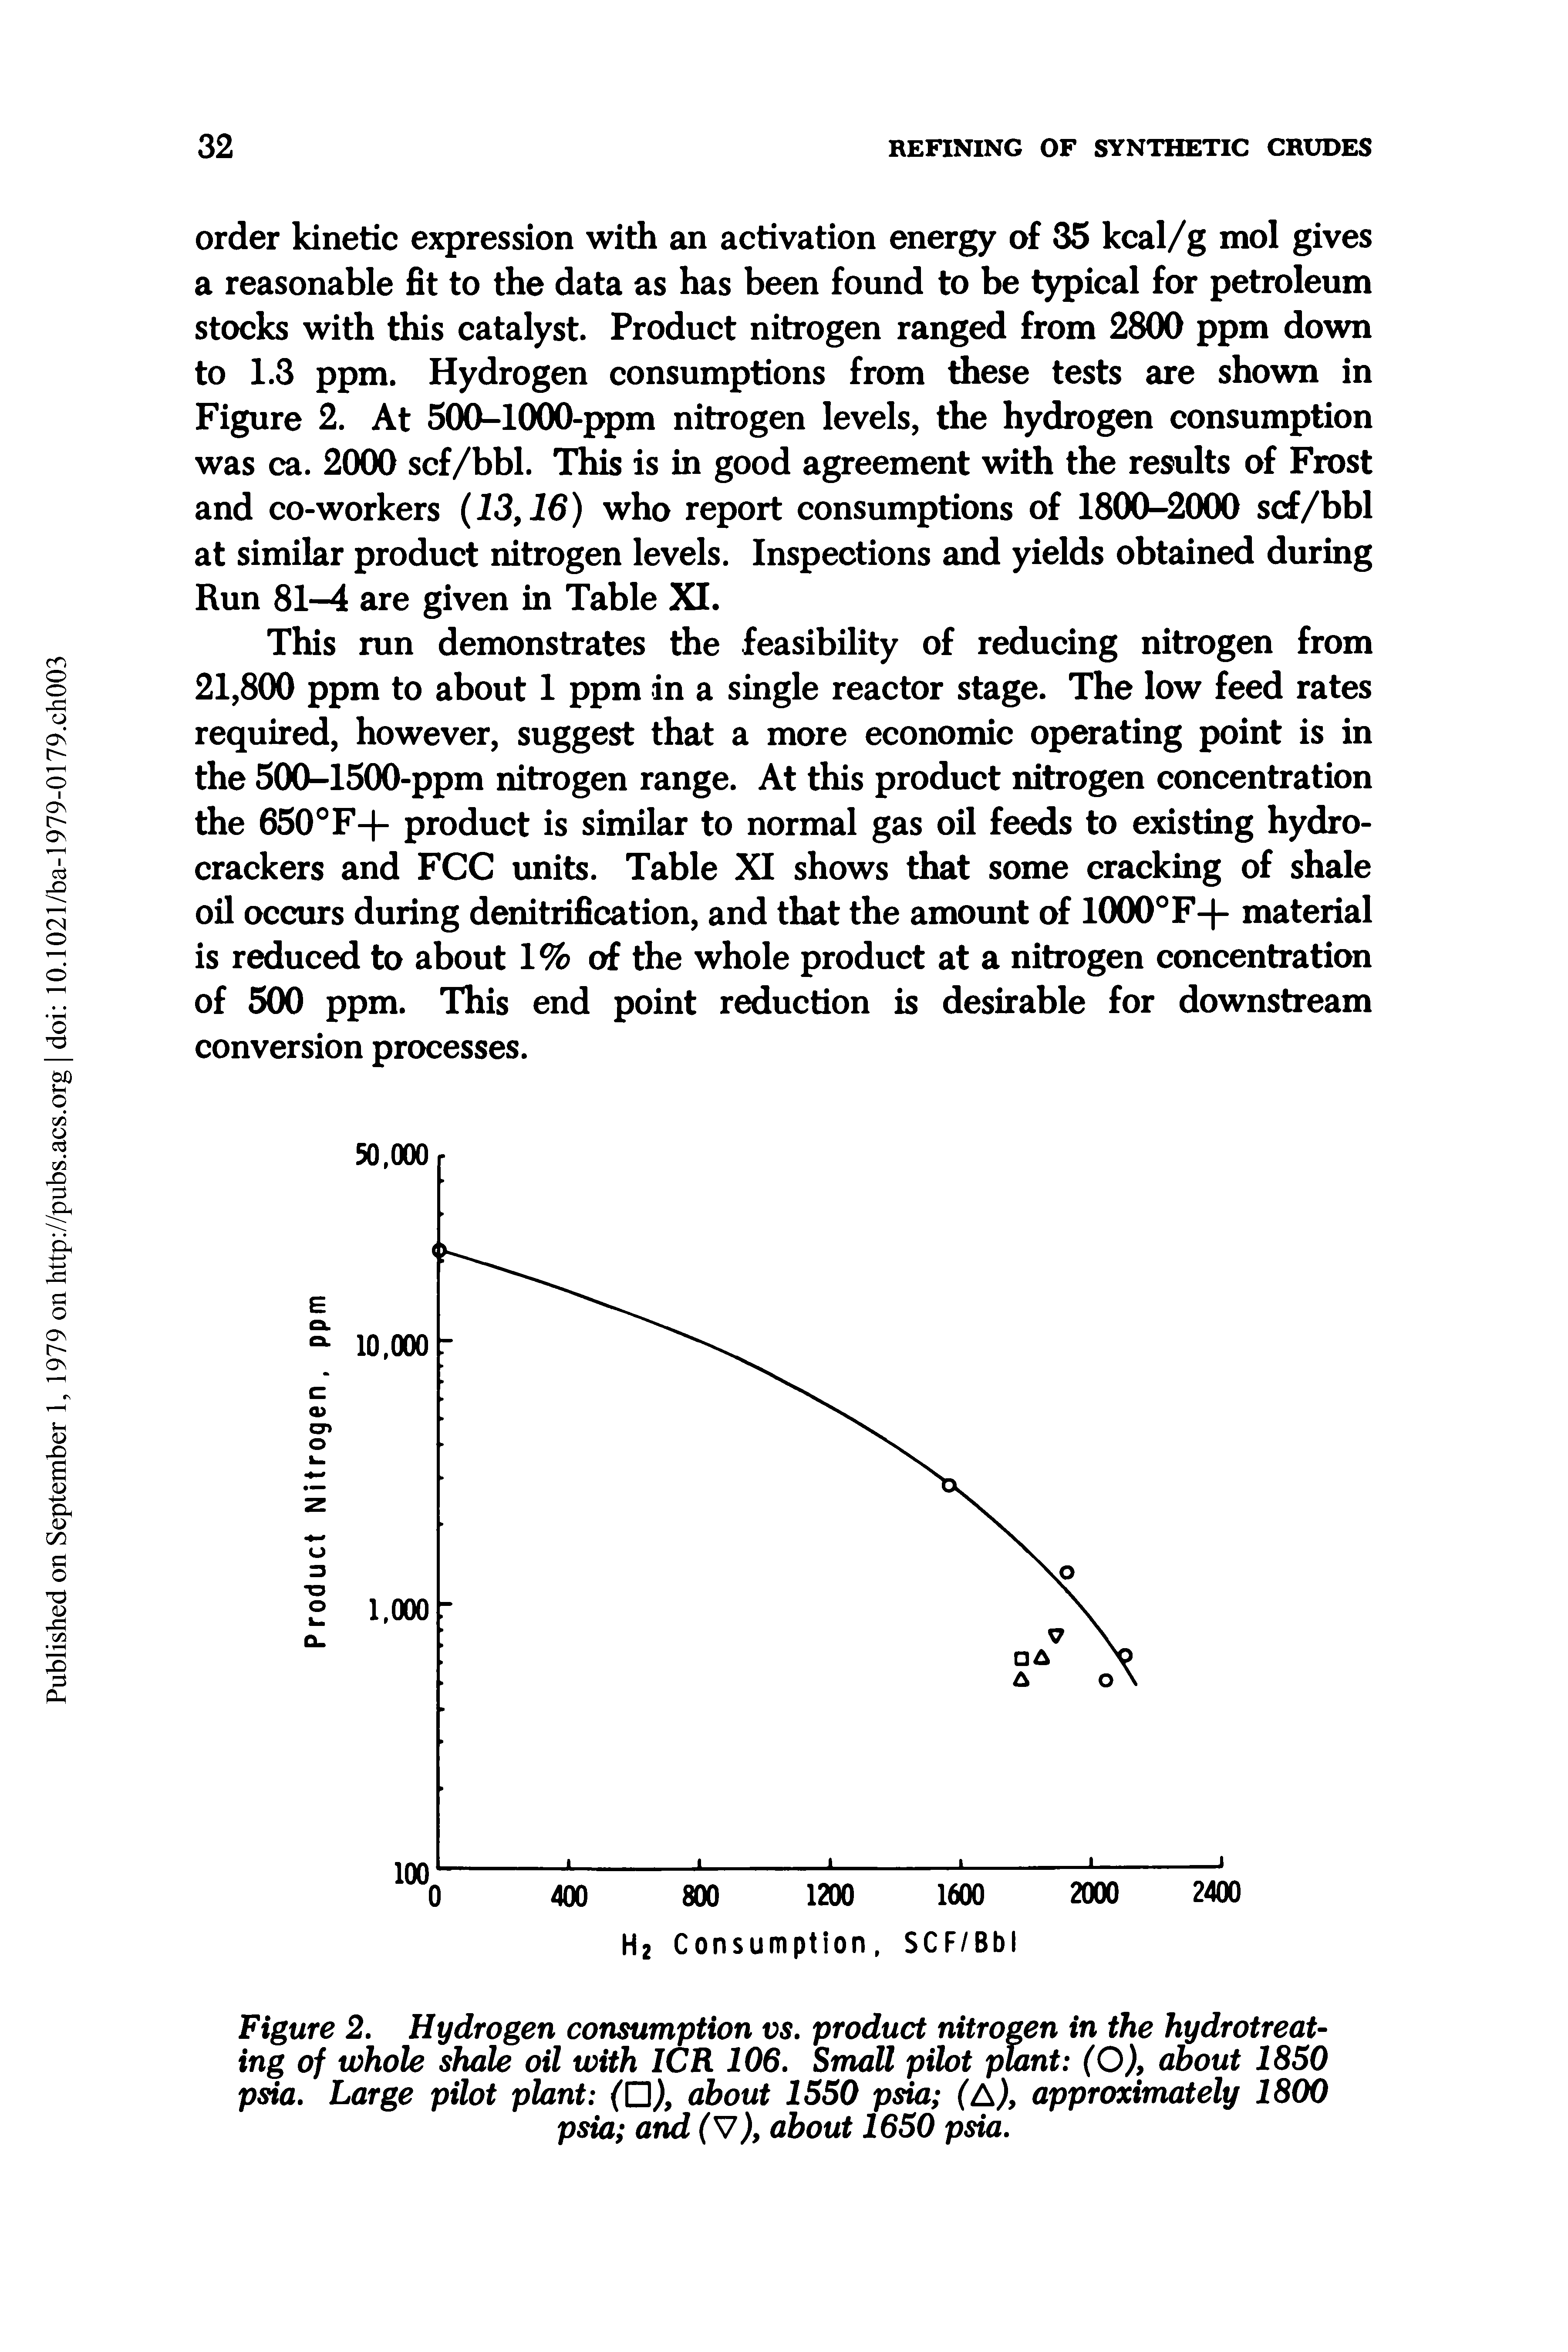 Figure 2. Hydrogen consumption vs. product nitrogen in the hydrotreat-ing of whole shale oil with ICR 106. Small pilot plant (O), about 1850 psia. Large pilot plant (U), about 1550 psia (A), approximately 1800 psia and (V), about 1650 psia.